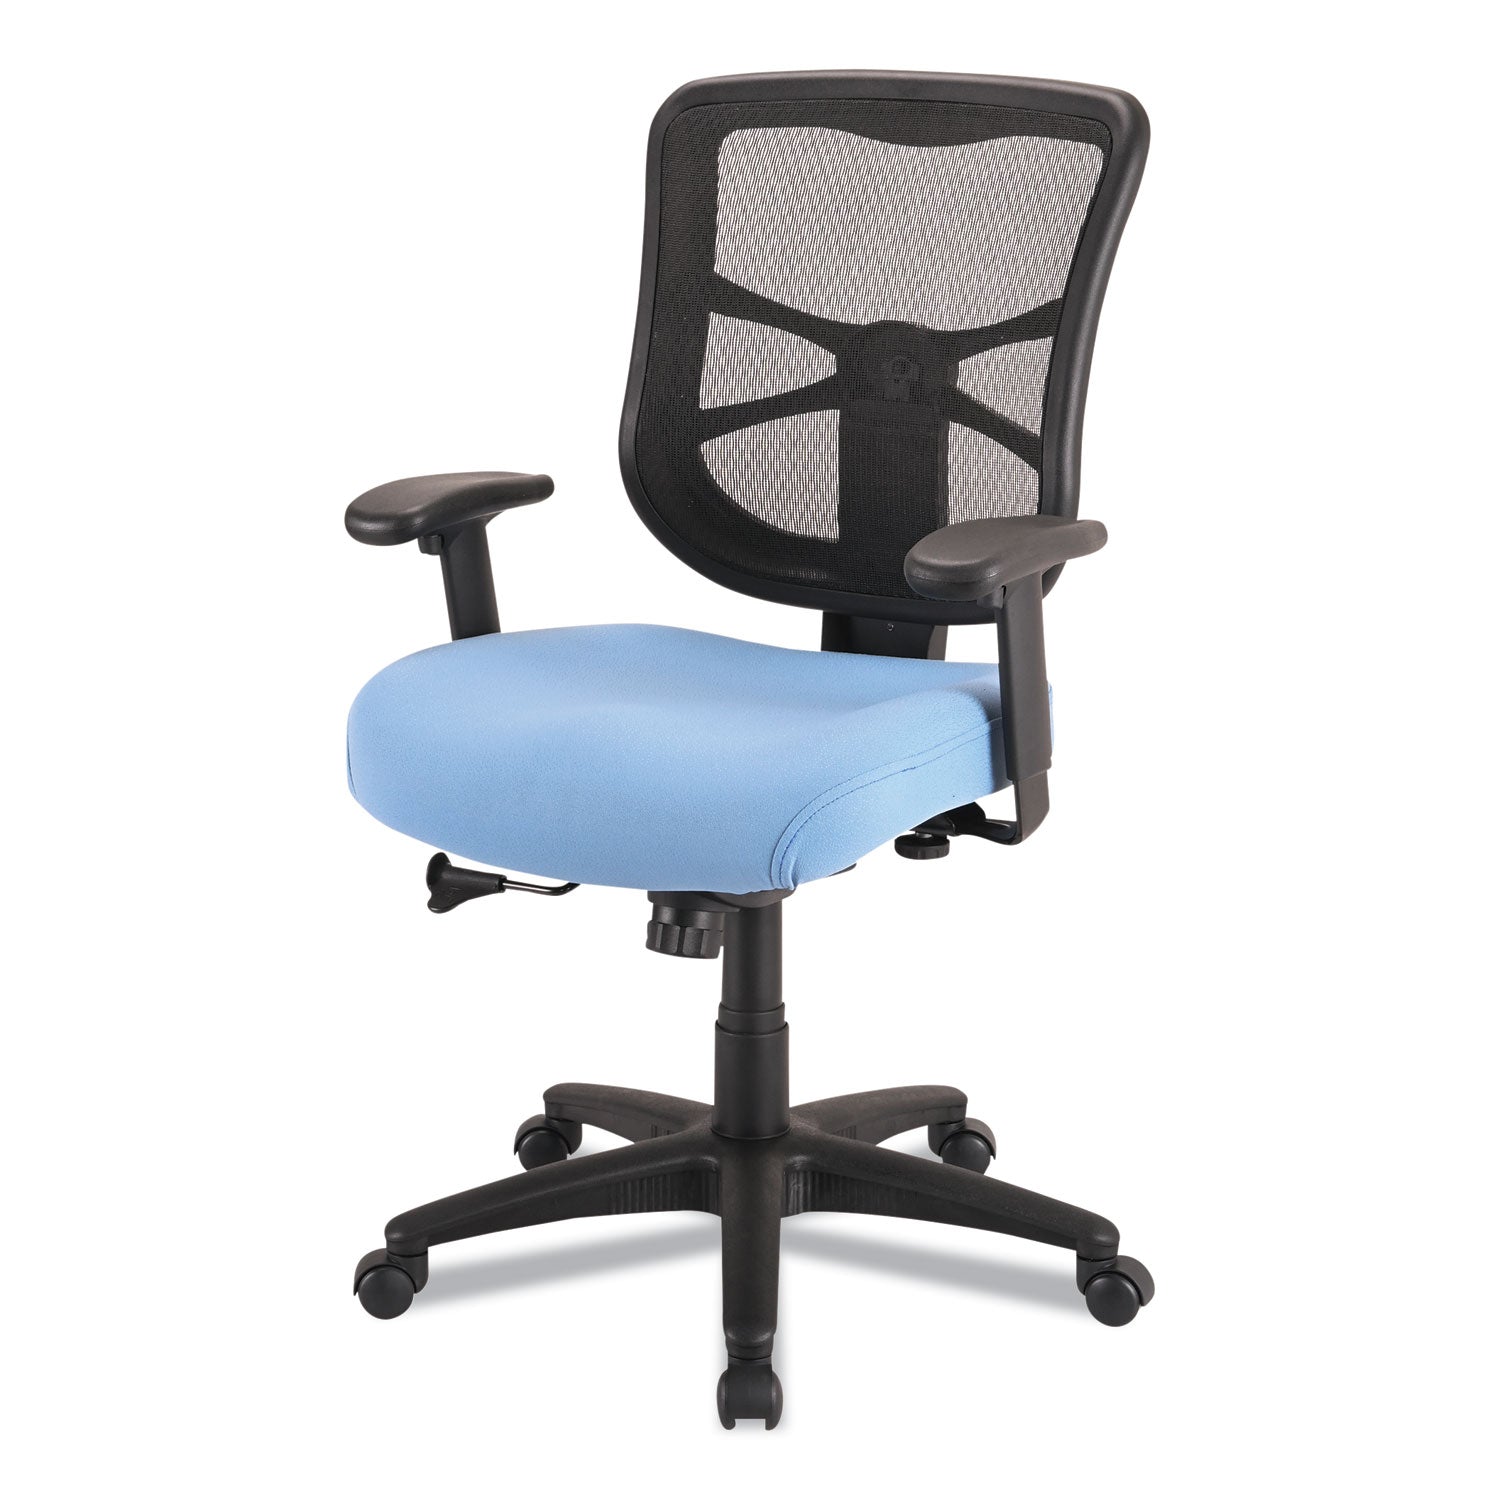 alera-elusion-series-mesh-mid-back-swivel-tilt-chair-supports-up-to-275-lb-179-to-218-seat-height-light-blue-seat_aleel42bme70b - 2